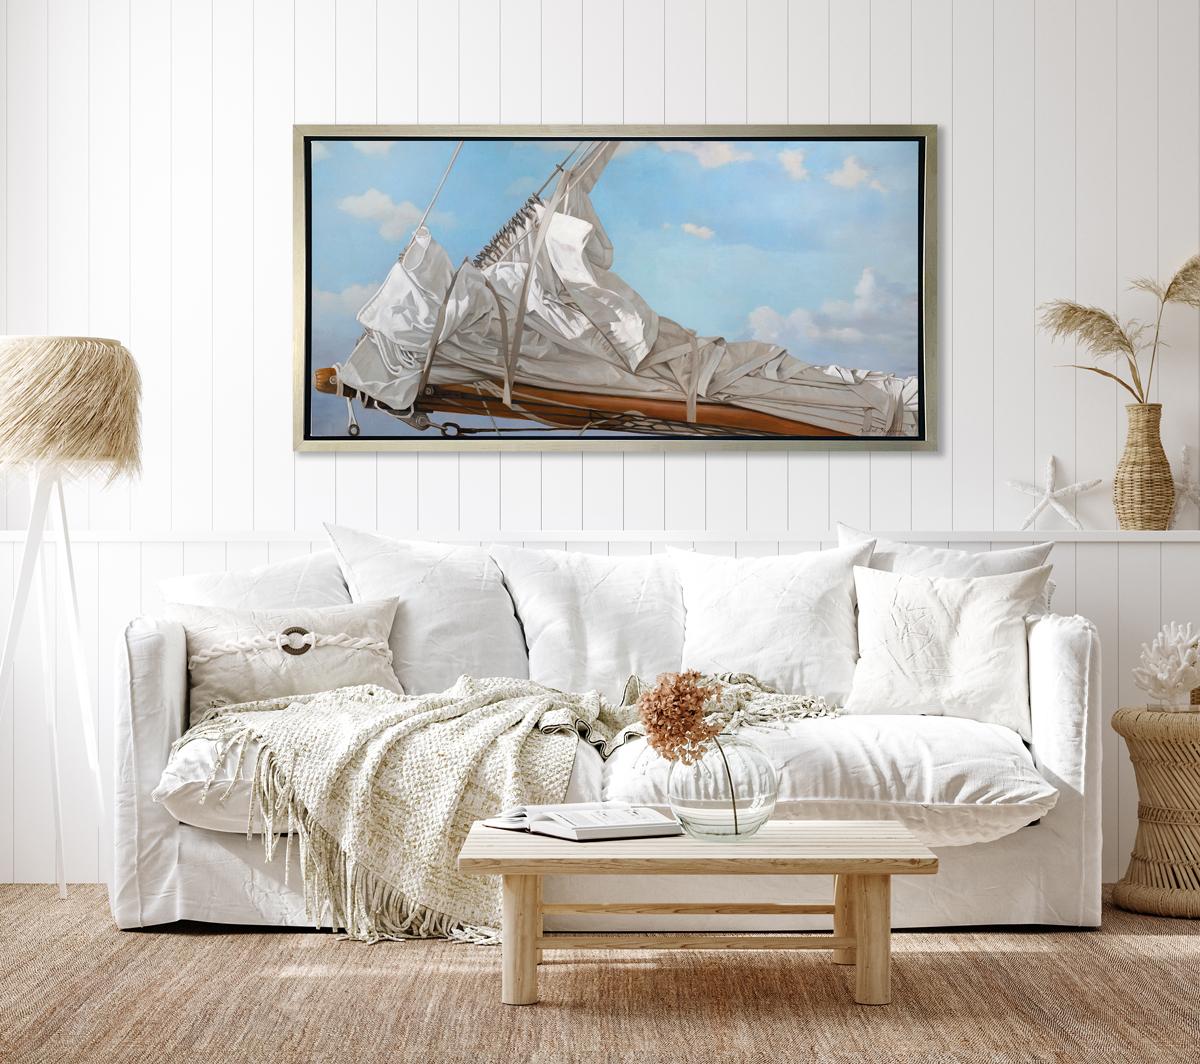 This realistic nautical limited edition print by Michel Brosseau captures the bow of a ship, with the sail tied down and a lightly cloudy blue sky behind it. The artist pays hyper attention to the folds and wrinkles of the sail fabric, creating a